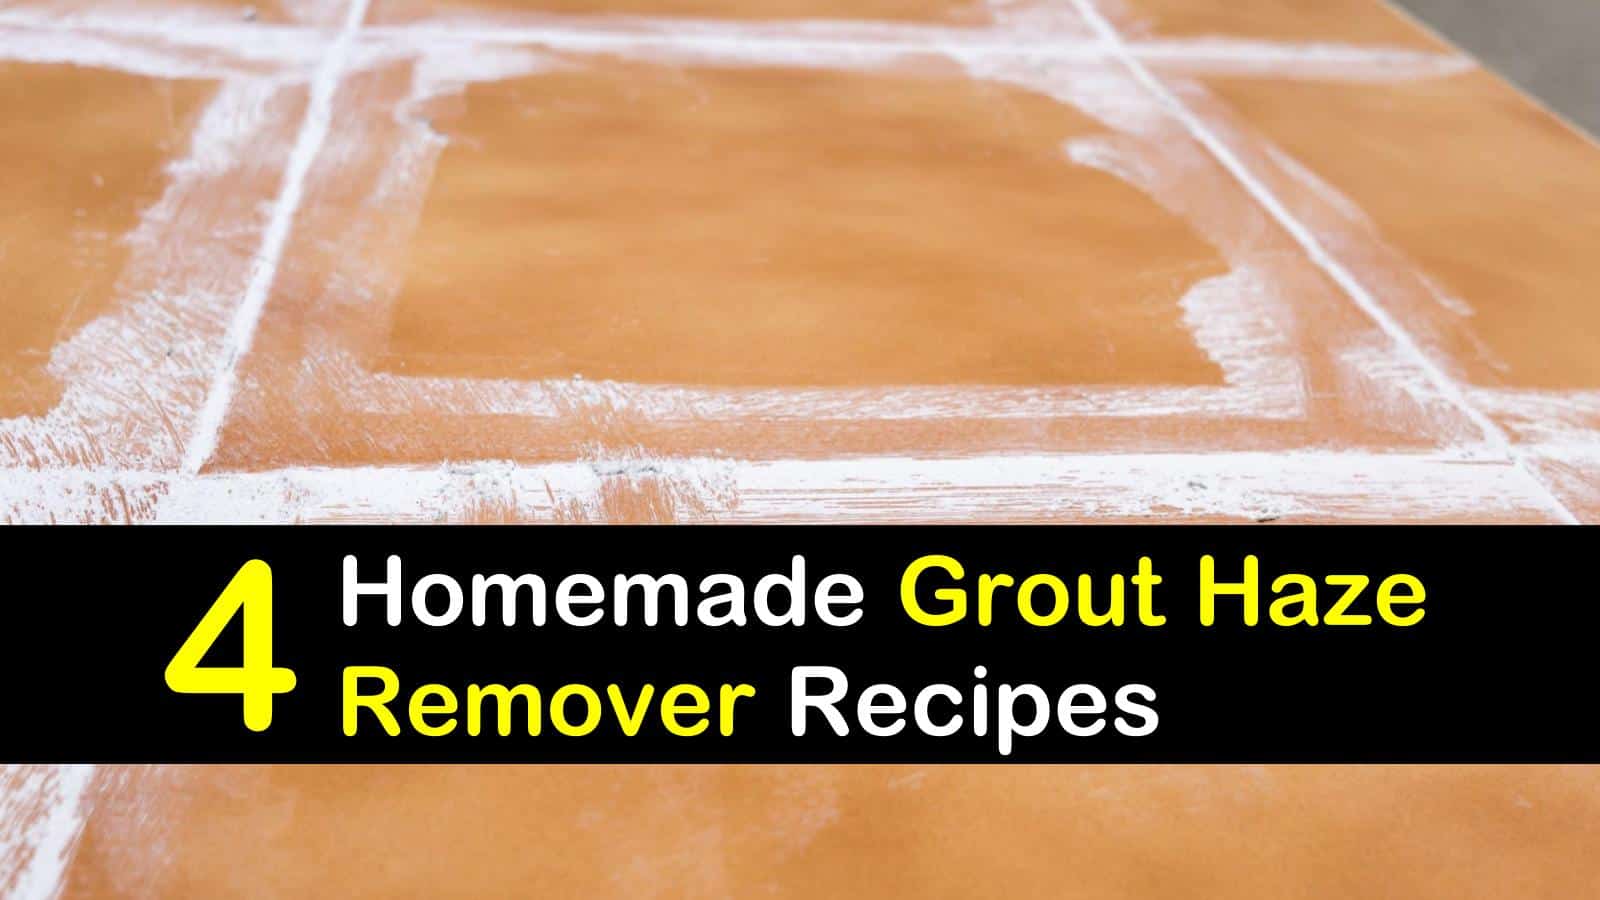 4 Do It Yourself Grout Haze Remover Recipes, How To Clean Grout Off Tile That Dried